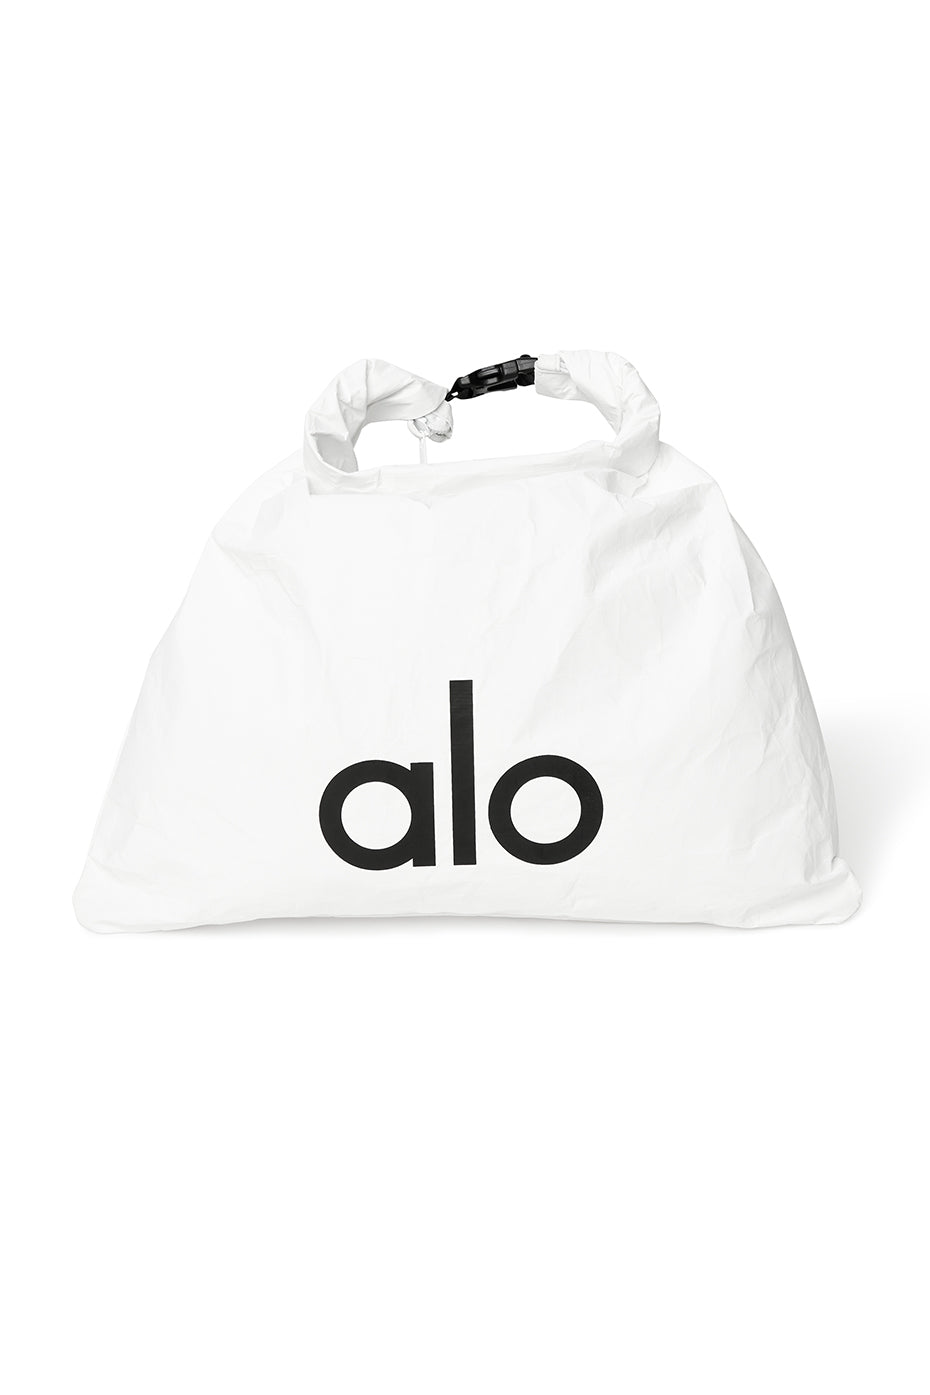 Keep It Dry Fitness Bag in White by Alo Yoga - International Design Forum